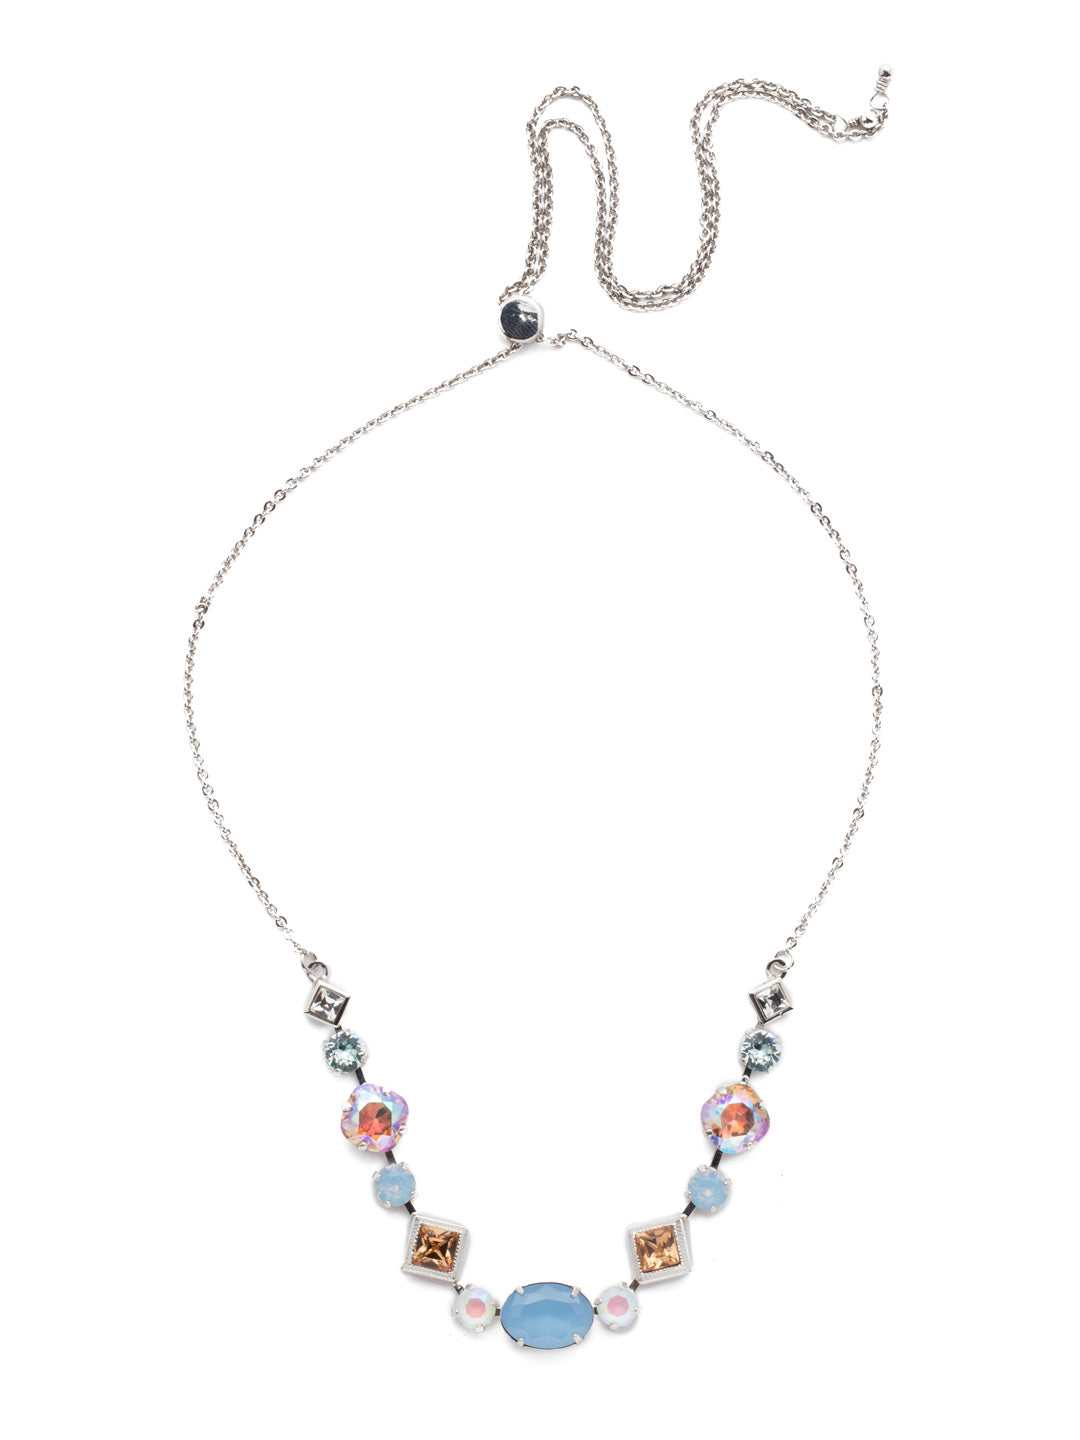 Cordelia Tennis Necklace - NEK29RHNTB - <p>Can't decide on a favorite gem shape? Good news! We've got you covered with this classic necklace perfect for a romantic night out, or for making an ordinary outfit extra special. From Sorrelli's Nantucket Blue collection in our Palladium Silver-tone finish.</p>